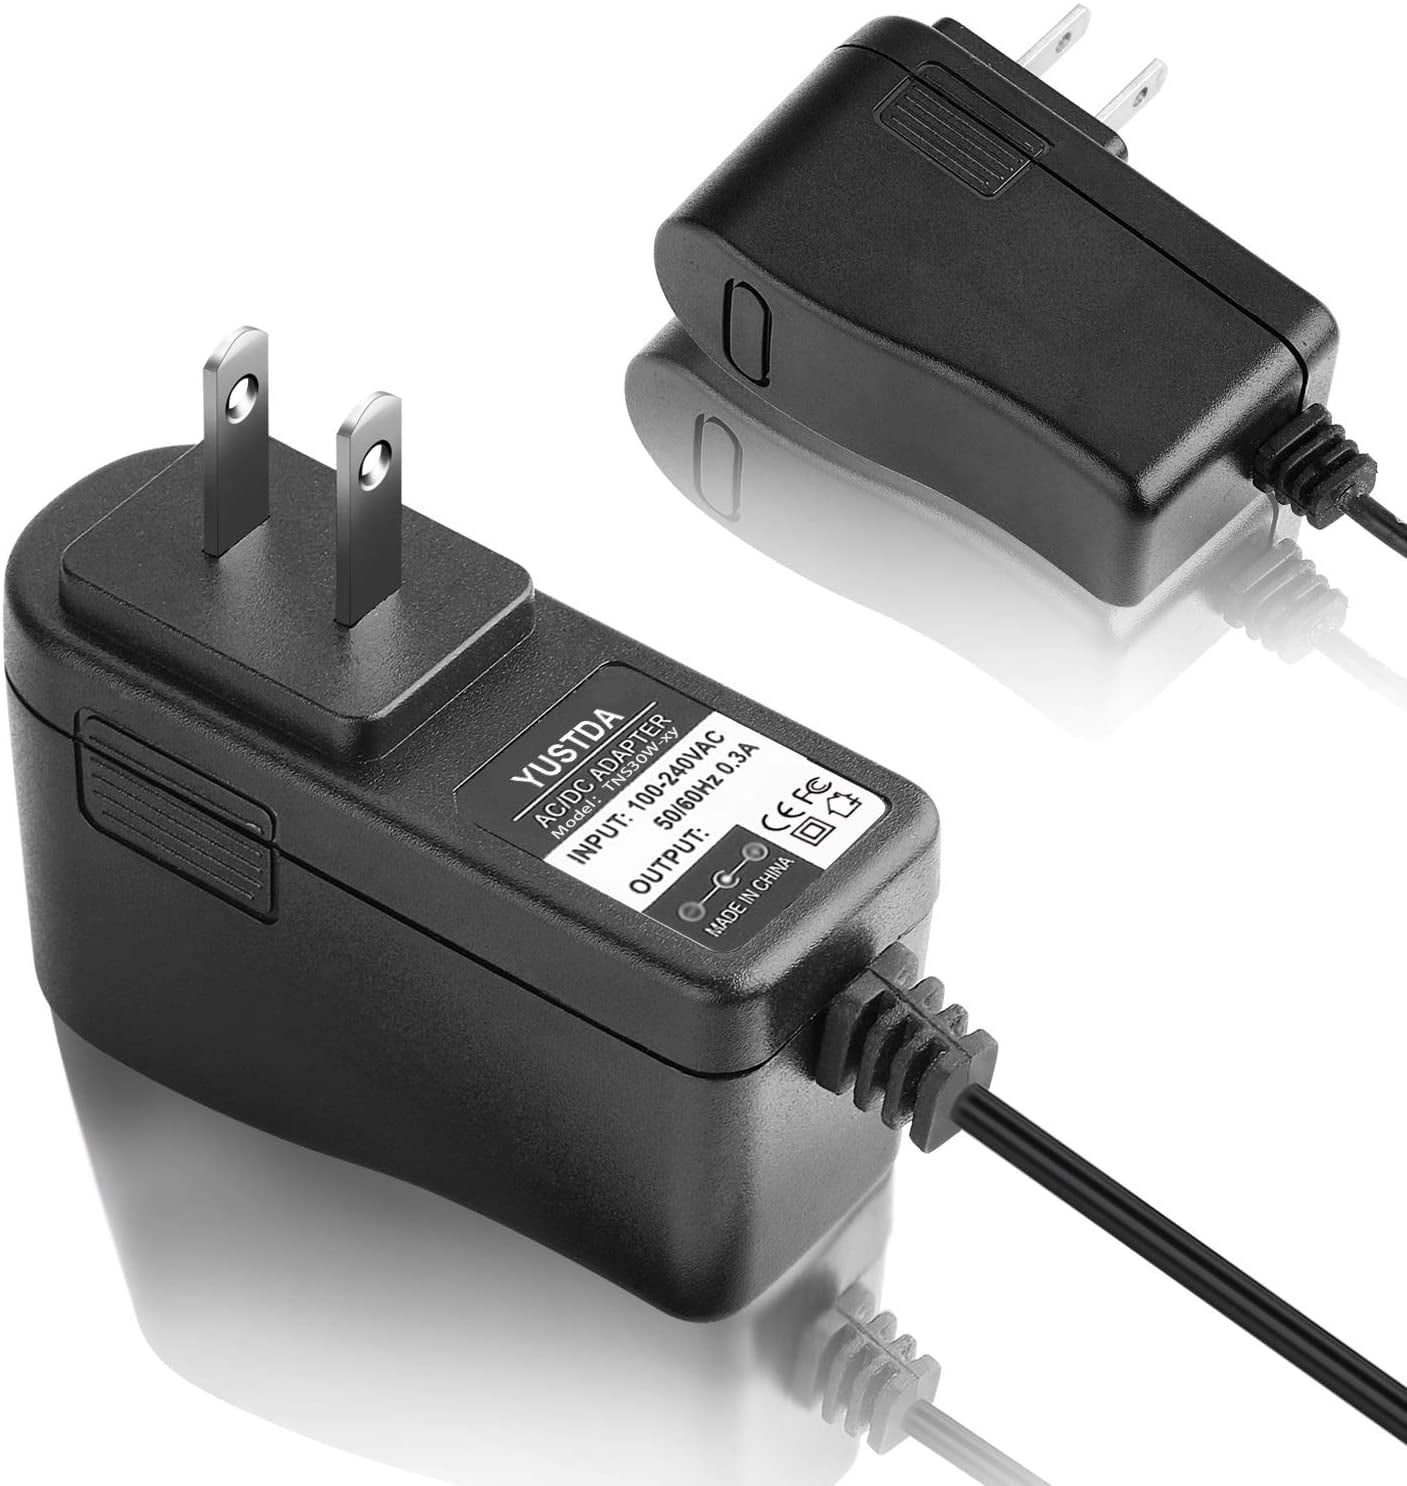  Accessory USA 9V AC DC Adapter Replaces Viper 42-9990 429990  for Viper 777 Dart Board, Viper Neptune Dartboard 9VDC Power Supply Cord  (NOT Output 5V!) : Electronics